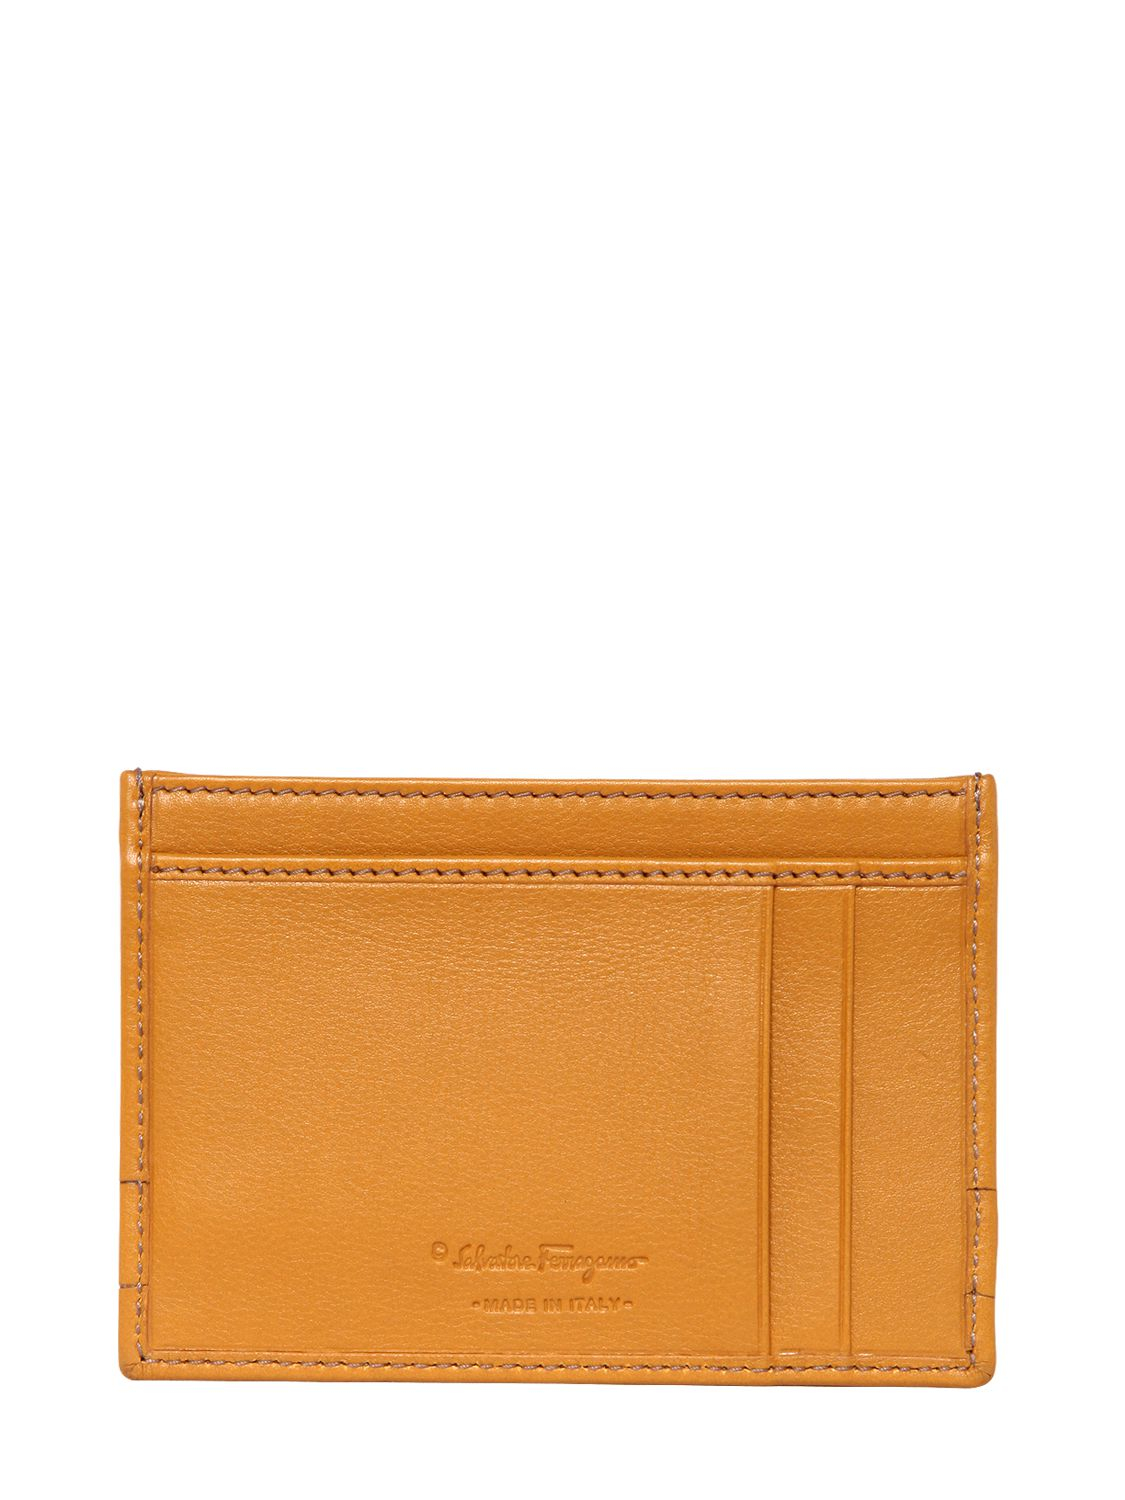 Ferragamo Nappa Leather Card Holder in Yellow for Men | Lyst